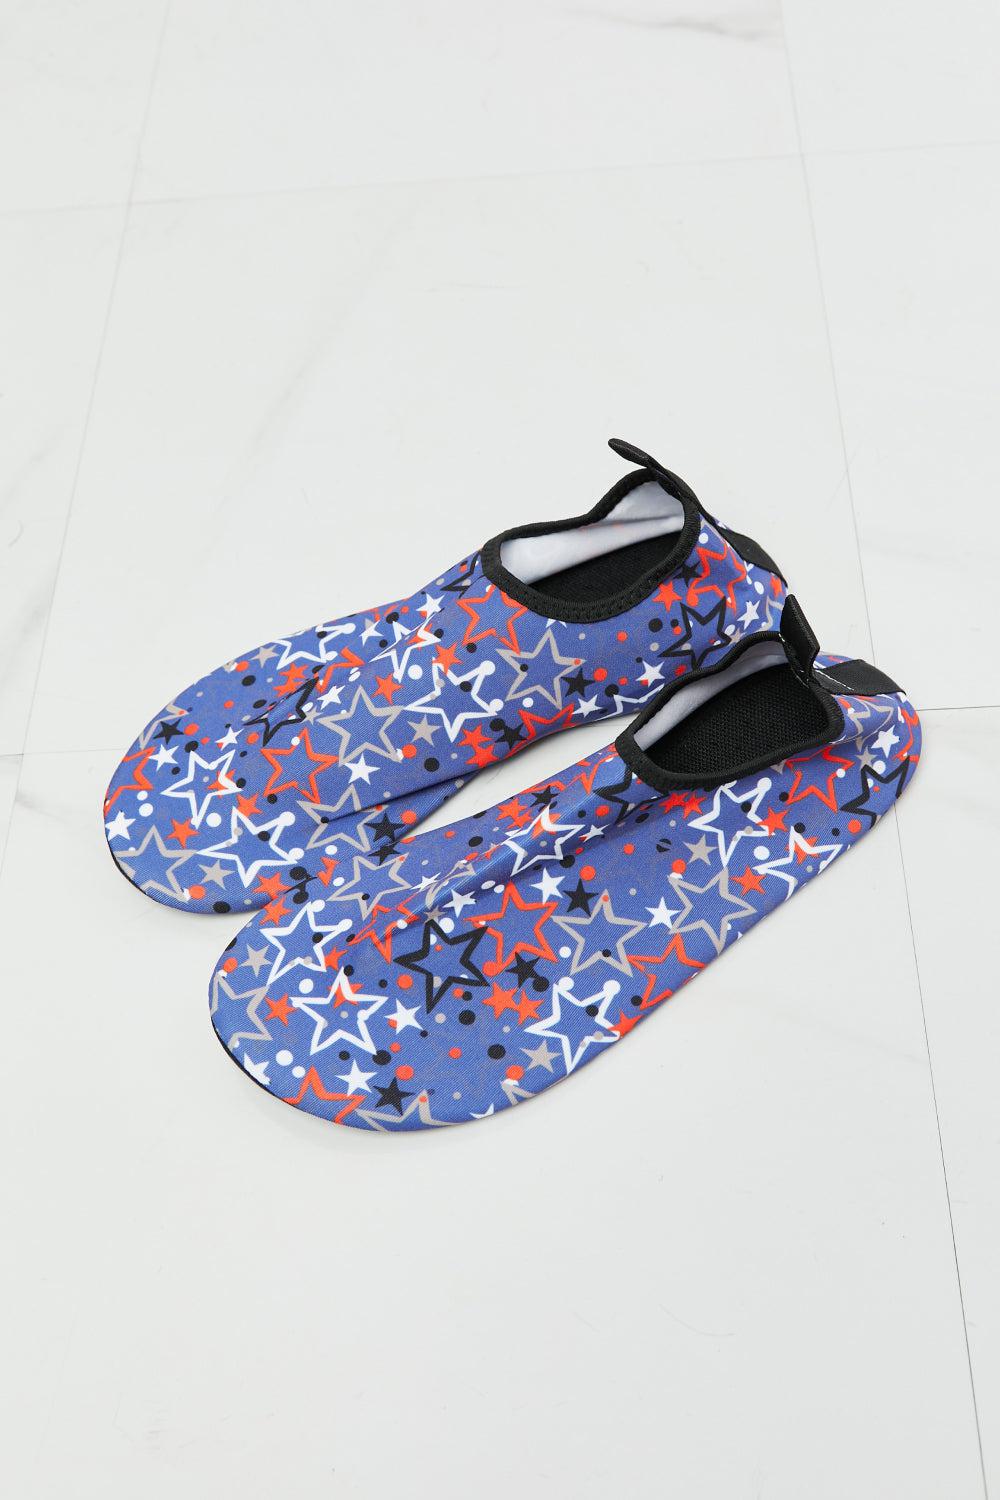 MMshoes On The Shore Water Shoes in Navy BLUE ZONE PLANET